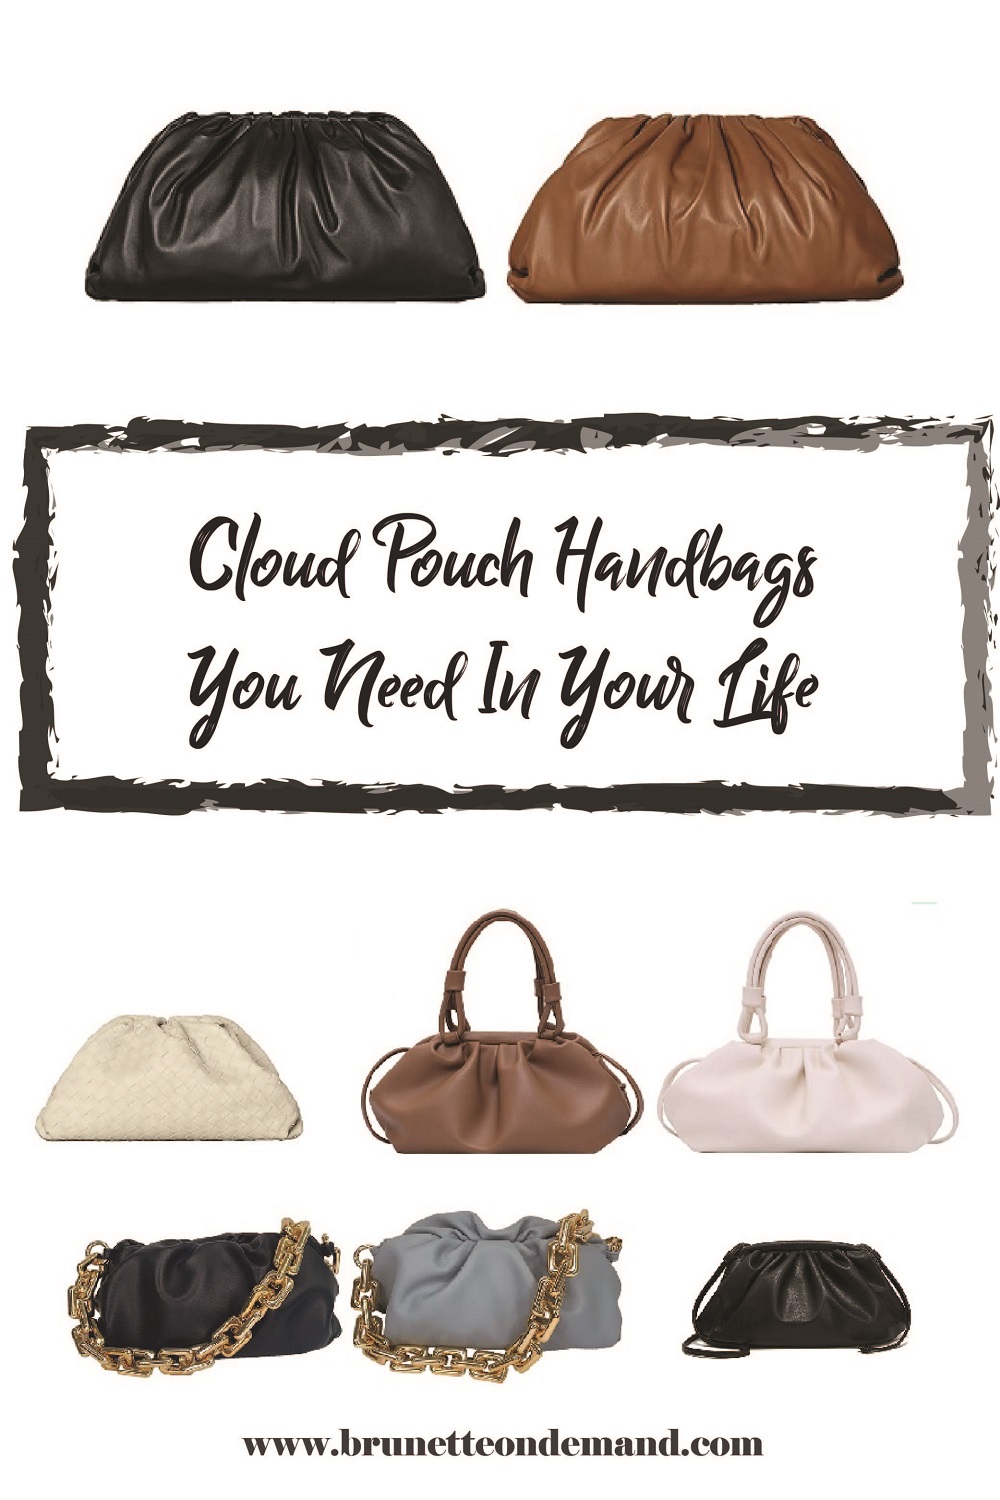 Affordable Cloud Pouch bags inspired by Bottega Veneta